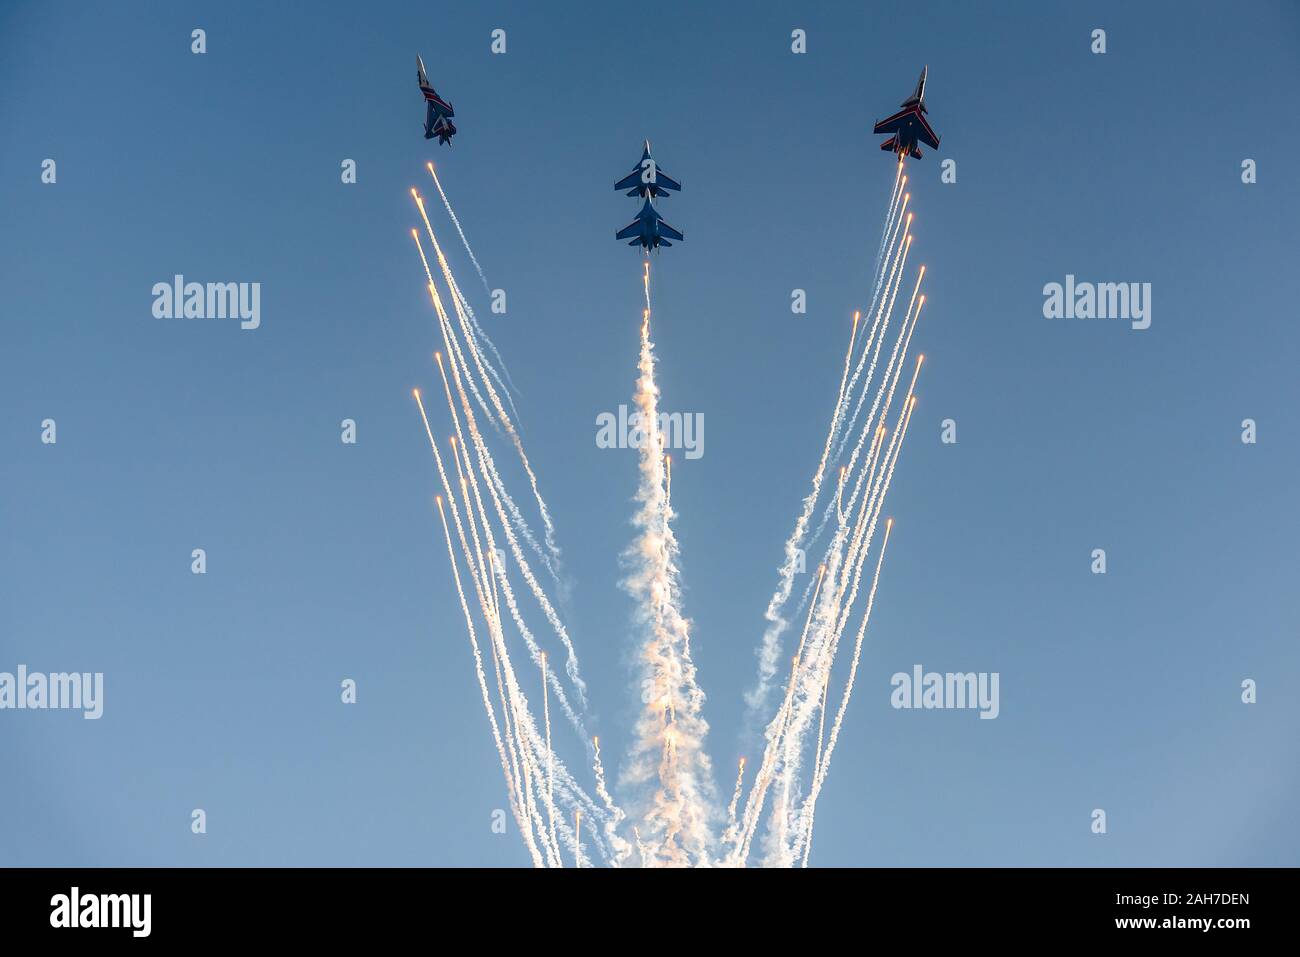 Sukhoi Su-30 jet fighter jets of the Russian Knights aerobatics team performing formation flight during MAKS 2019 airshow, Zhukovsky, Russia. Stock Photo